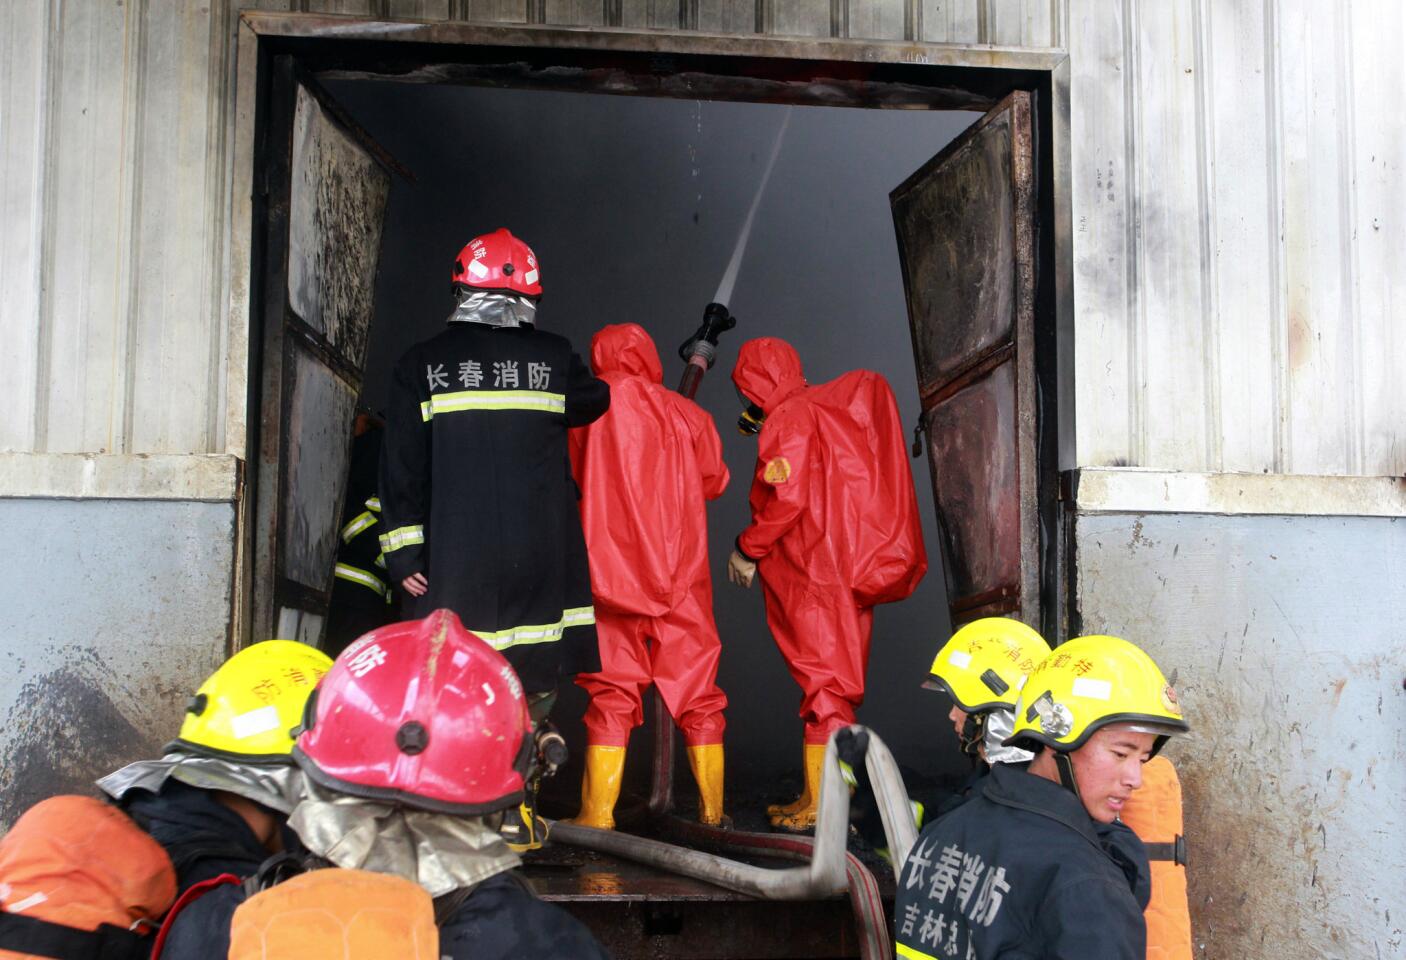 Firefighters put out the blaze at a poultry plant that caught fire in northeast China. More than 100 people were killed in the blaze in Jilin province's Mishazi township.